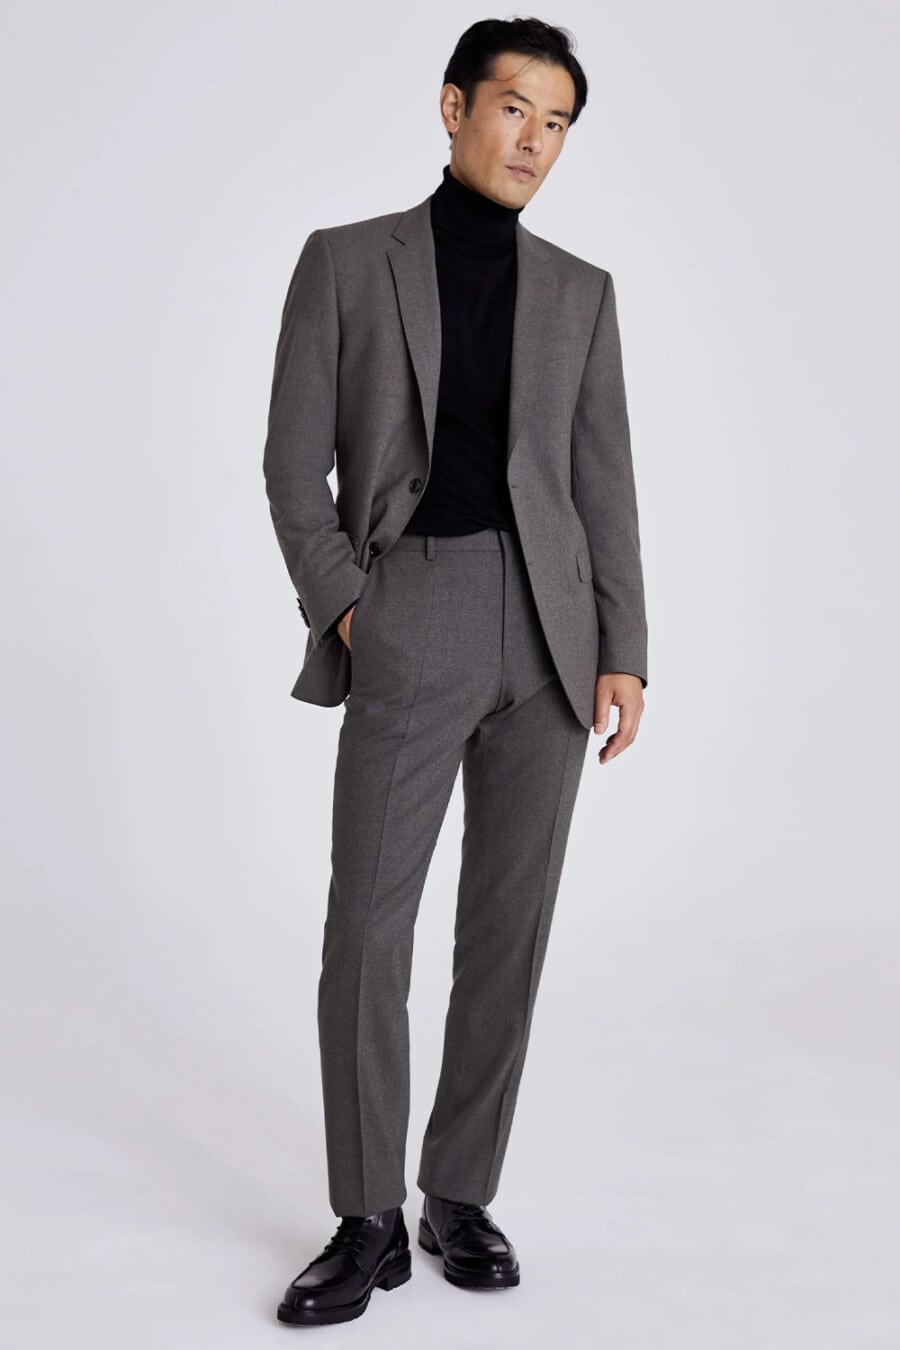 Men's charcoal suit, black turtleneck and black leather boots outfit